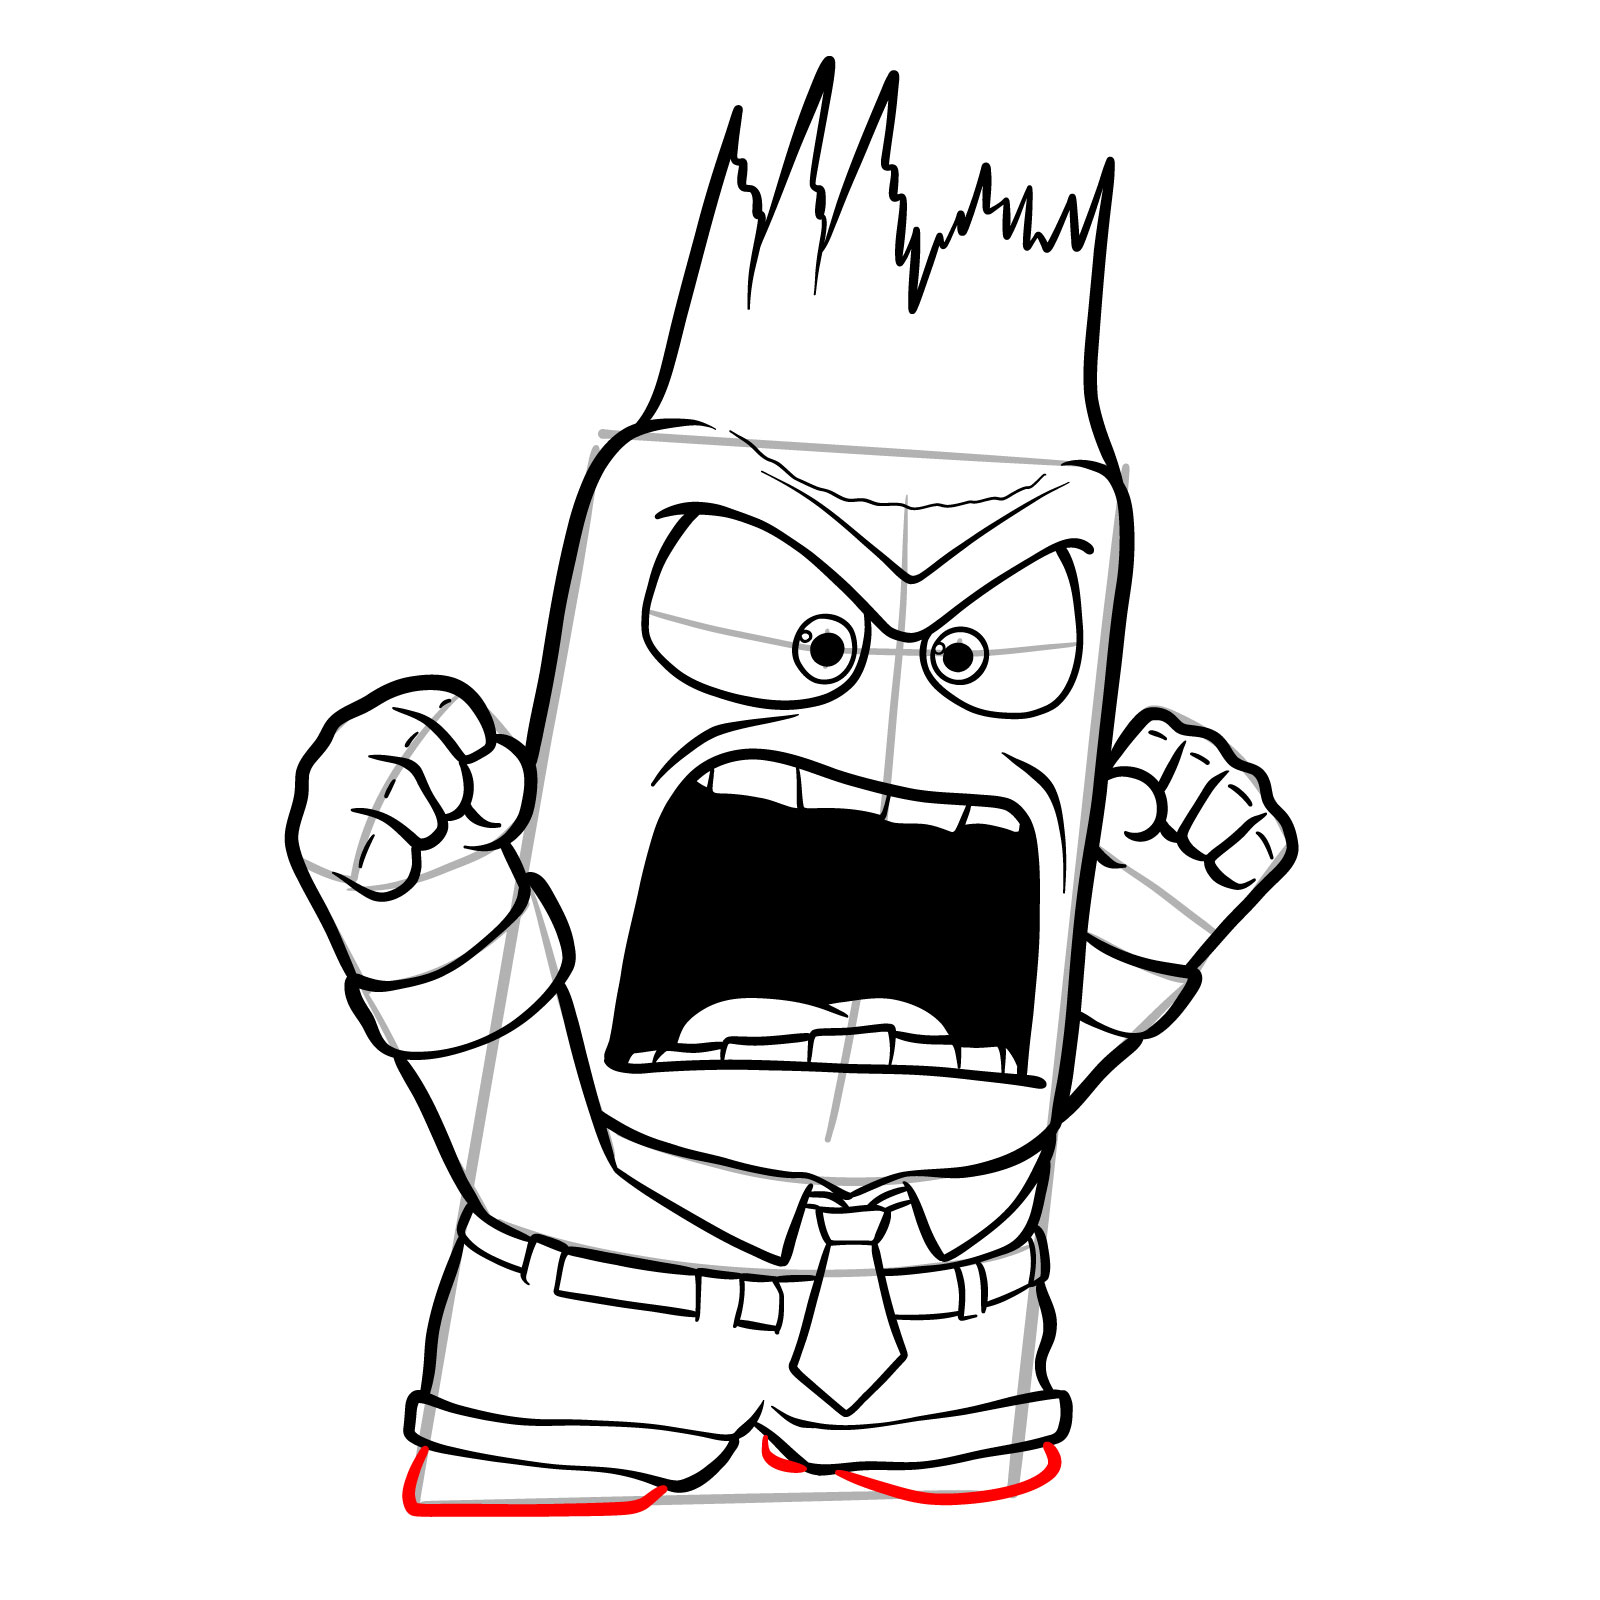 How to draw angry Anger with his head in flames - step 13